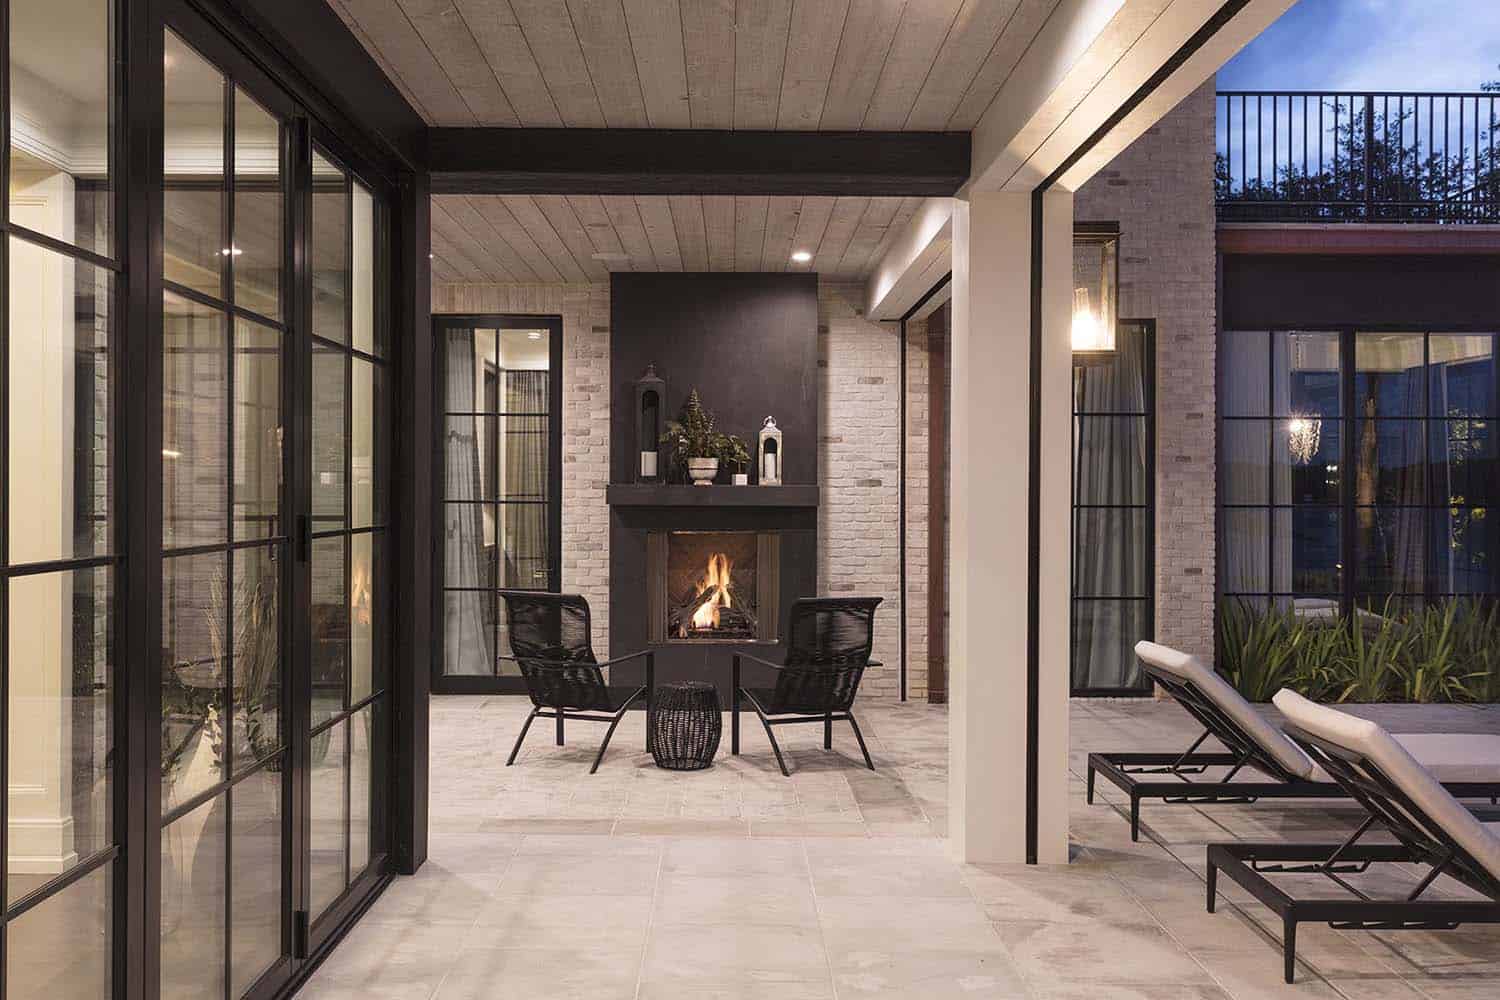 transitional style lake house covered patio with a fireplace at dusk